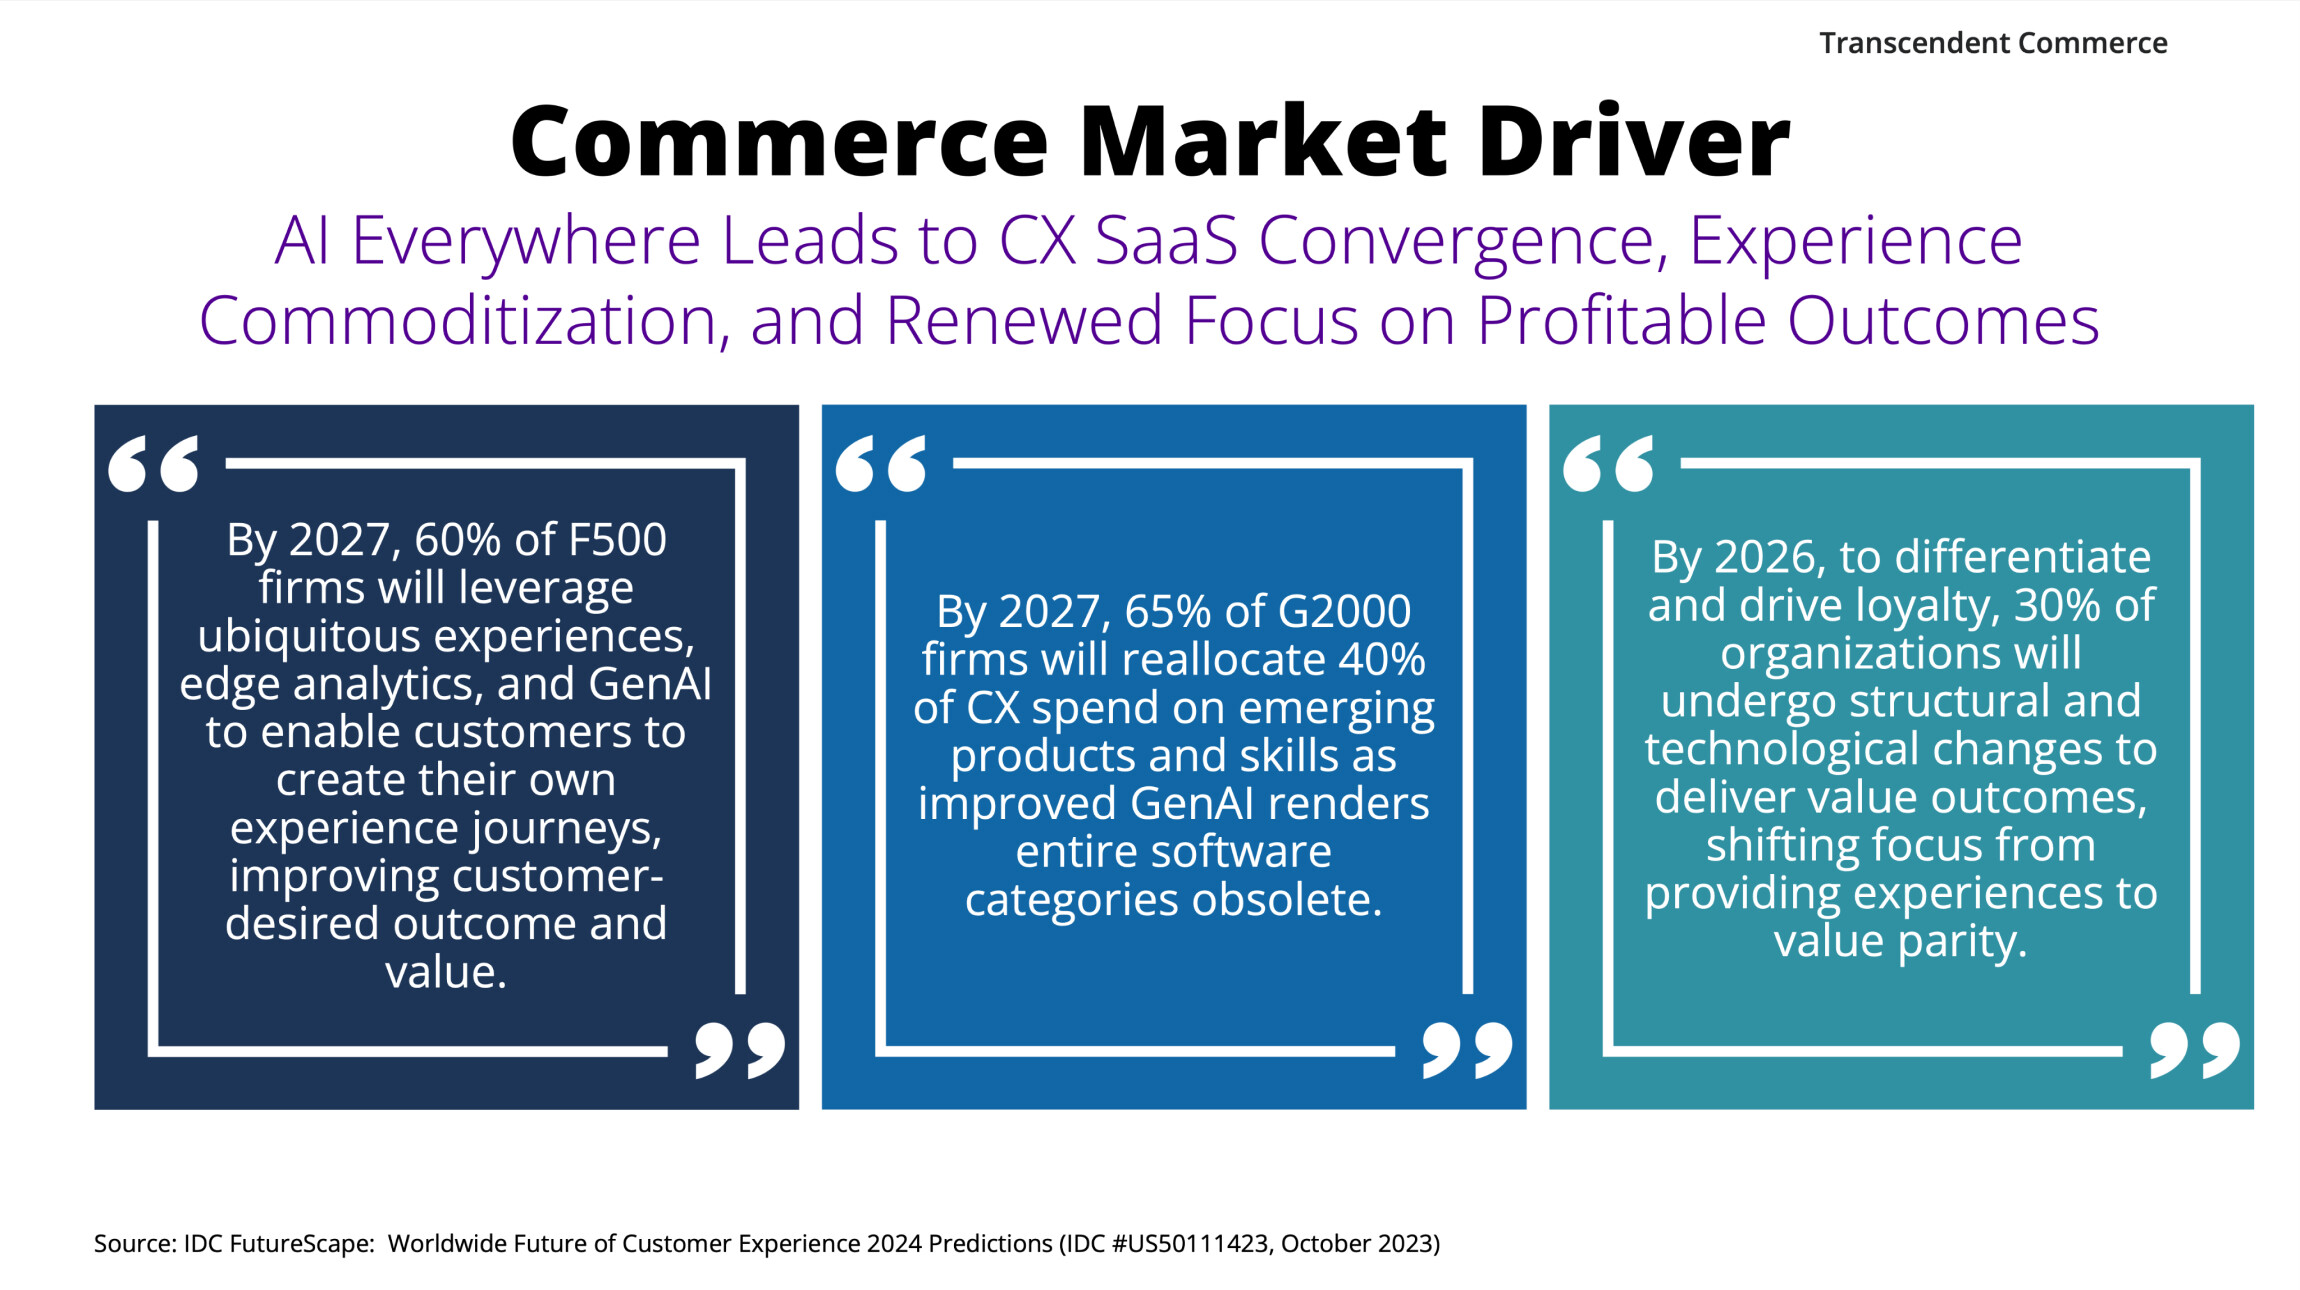 Statistics on the impact of CX SaaS convergence